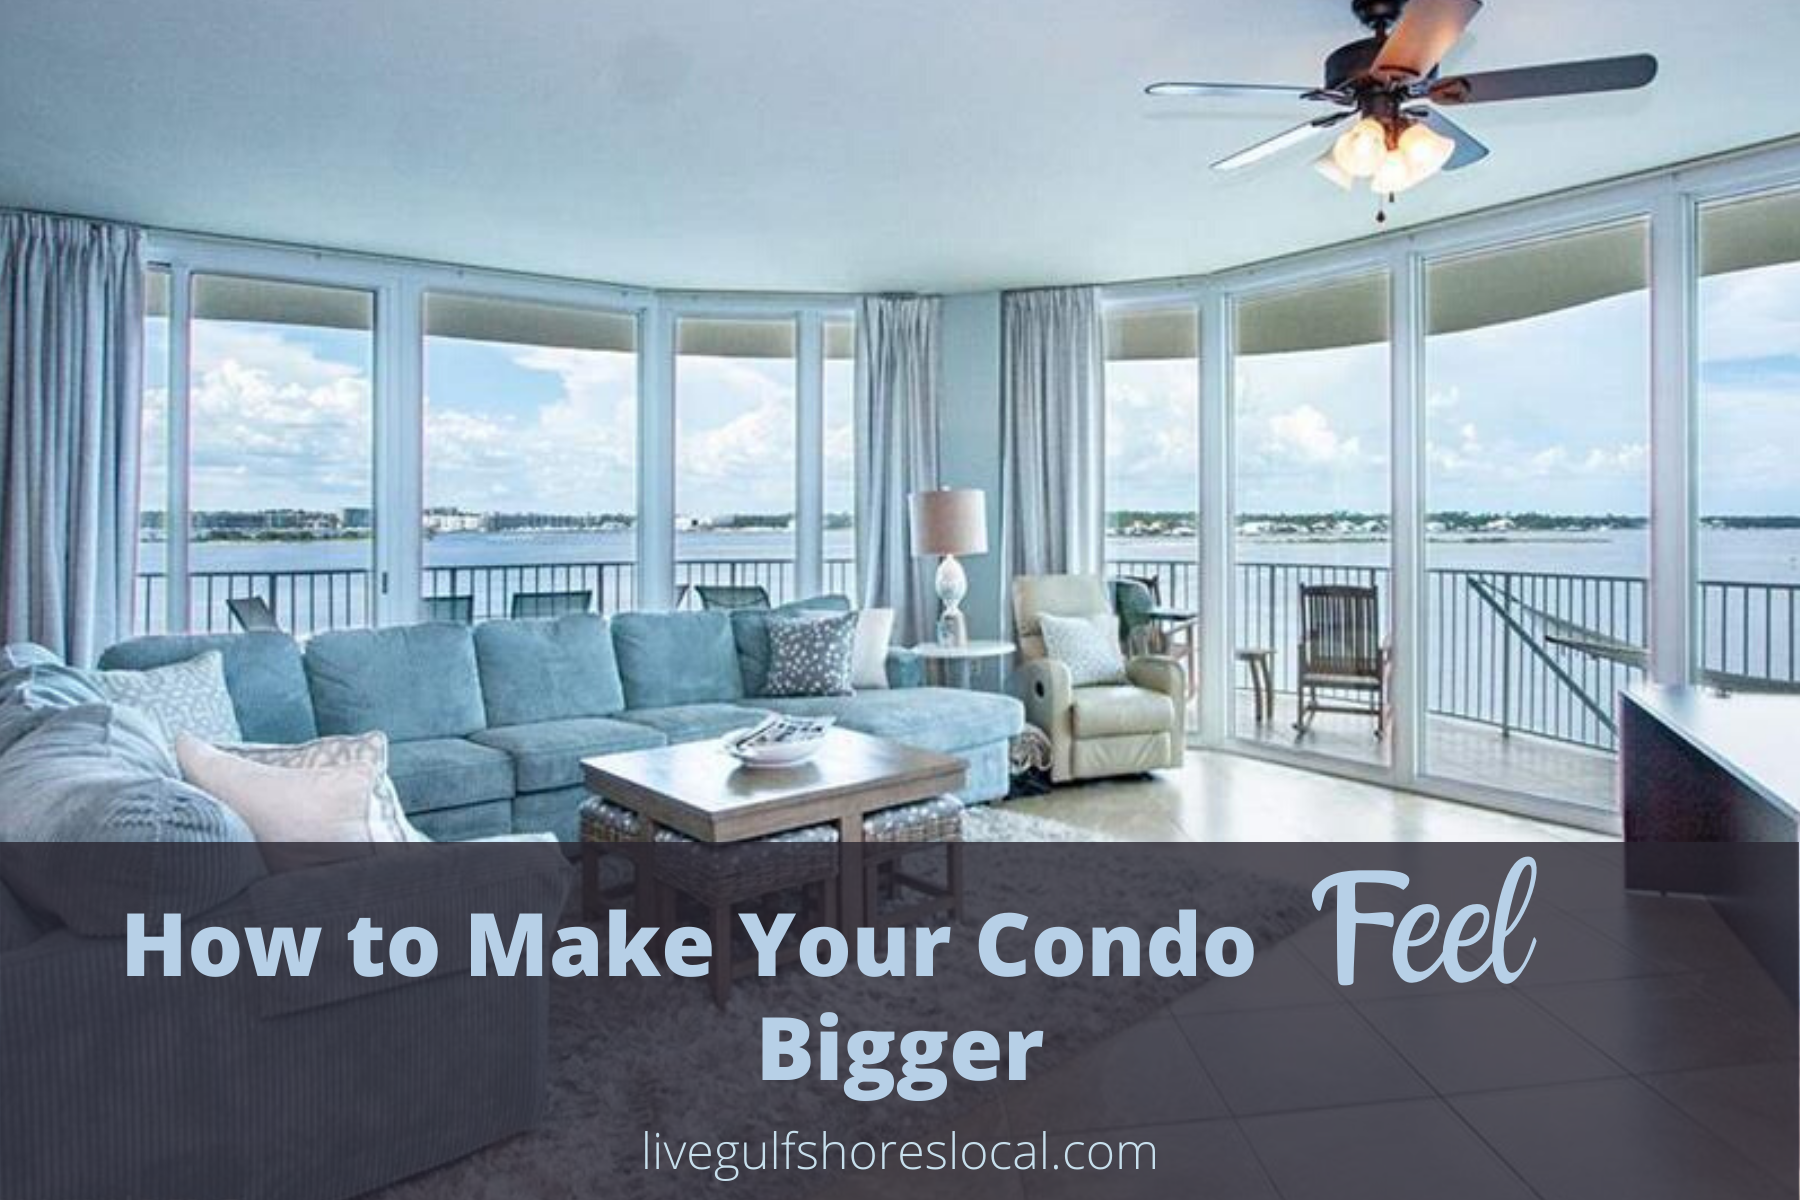 How to Make Your Condo Feel Bigger